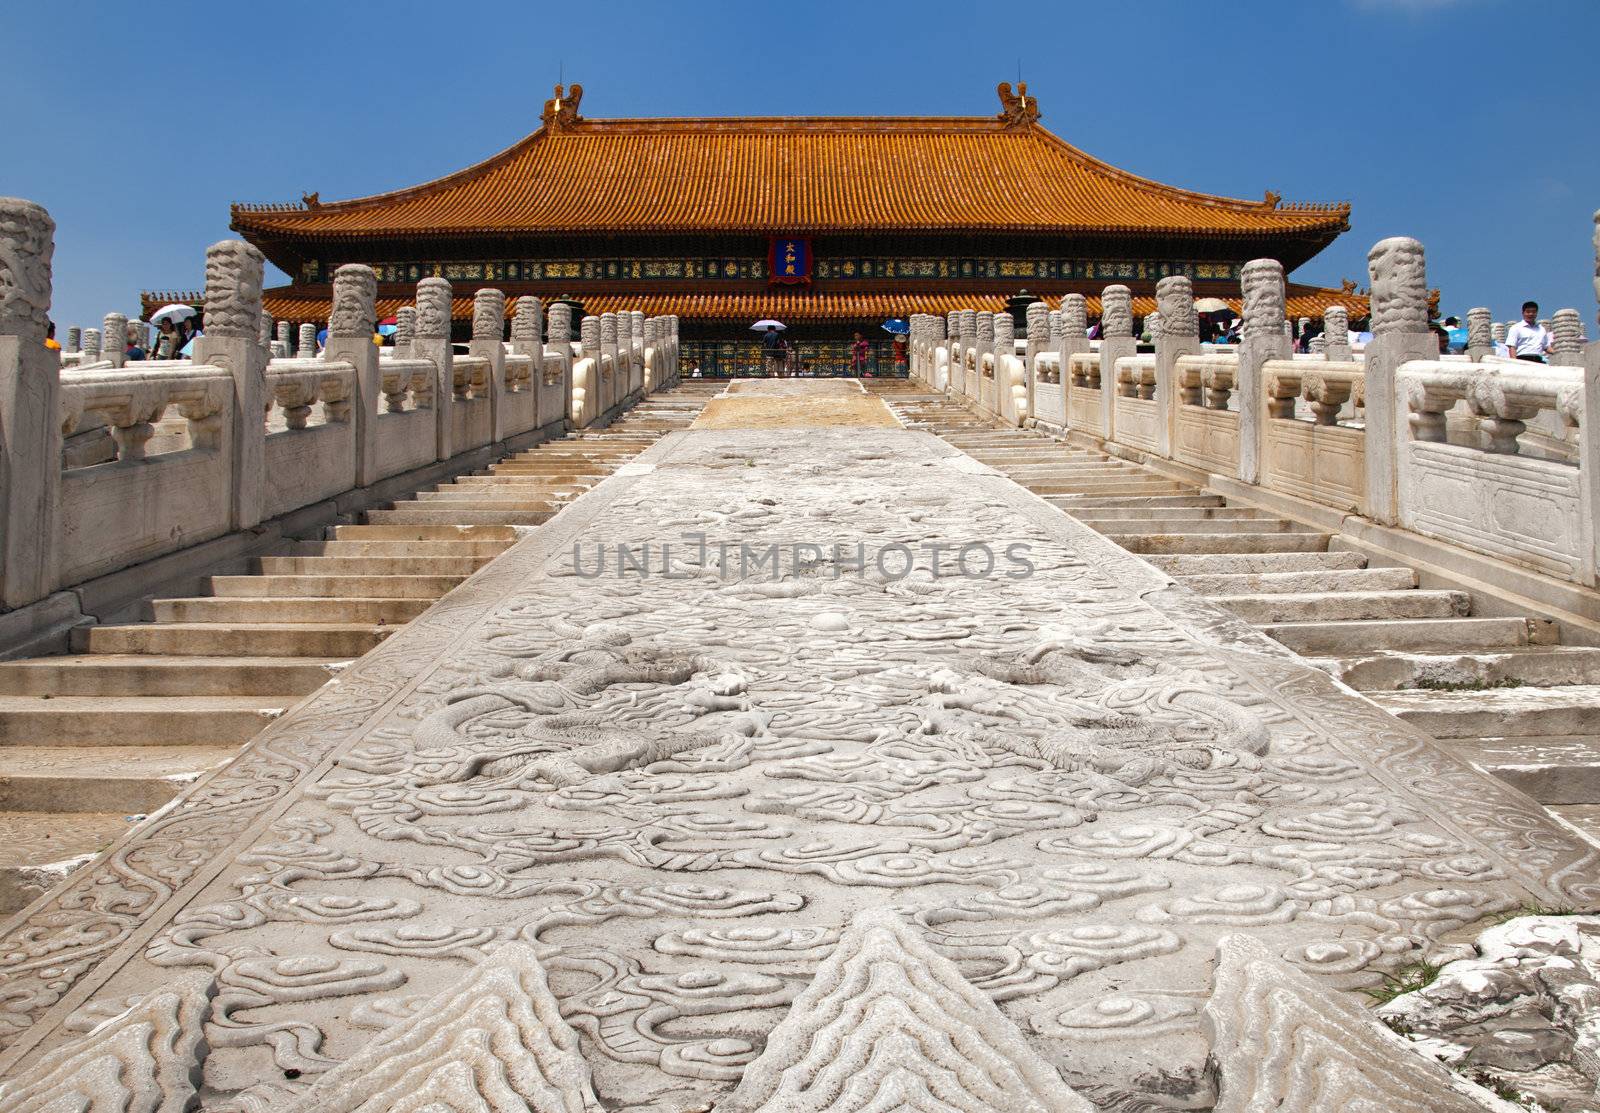 The Hall of Supreme Harmony by urmoments